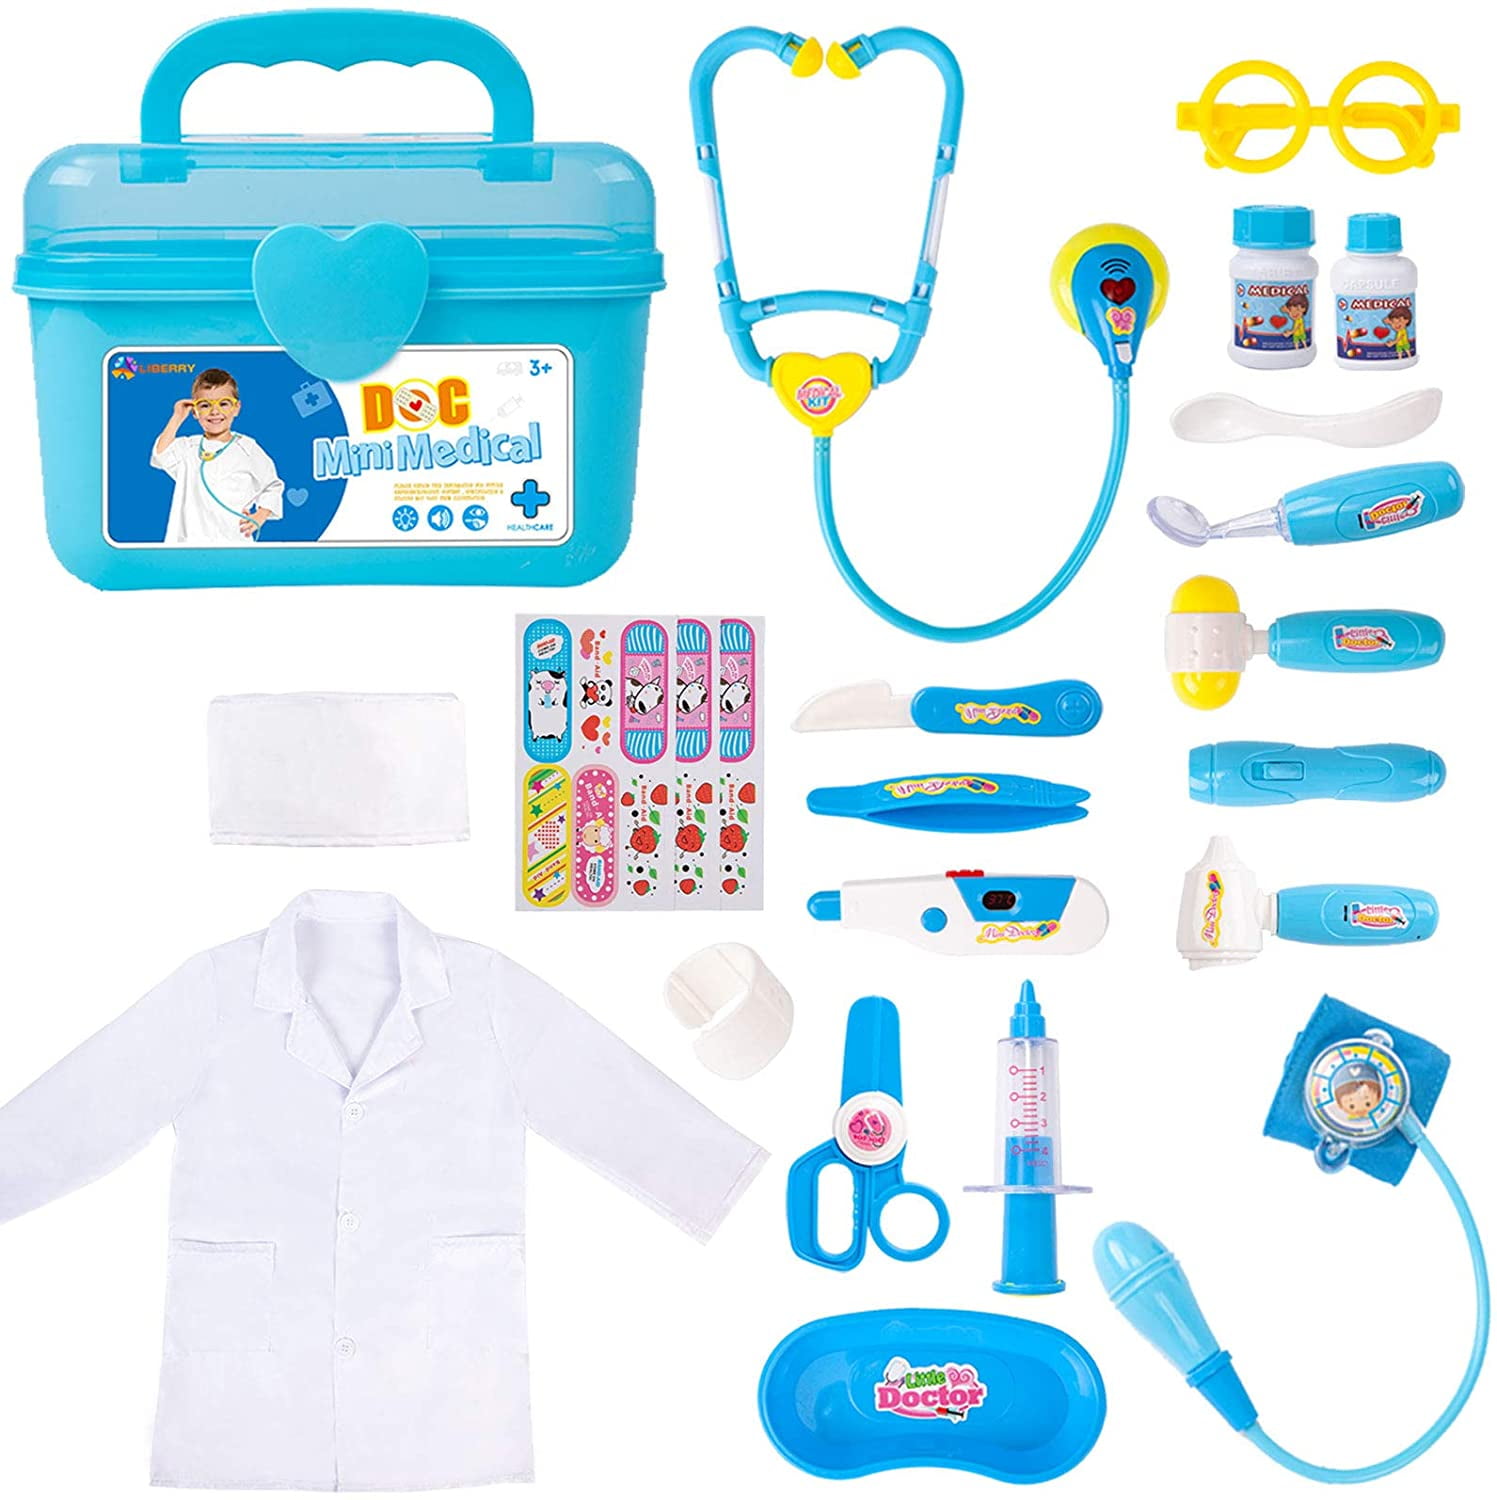 Buyger 30 Piece Doctor's Case Medical Doctor Role Play Toy Gifts Children Blau 